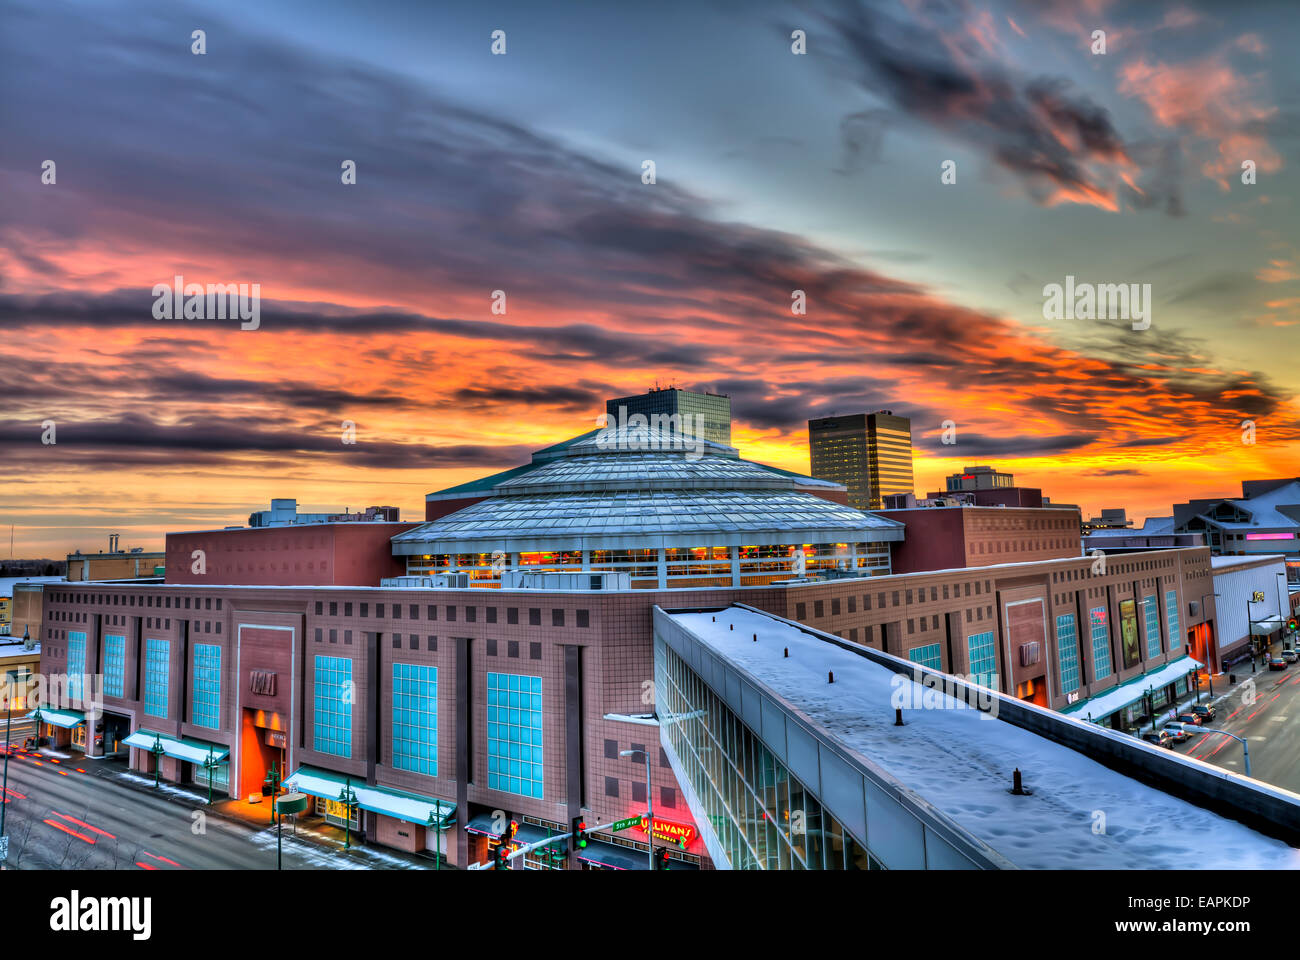 Sunset Over The Anchorage 5Th Avenue Mall And Skywalk, Southcentral Alaska,  Winter Hdr Stock Photo - Alamy